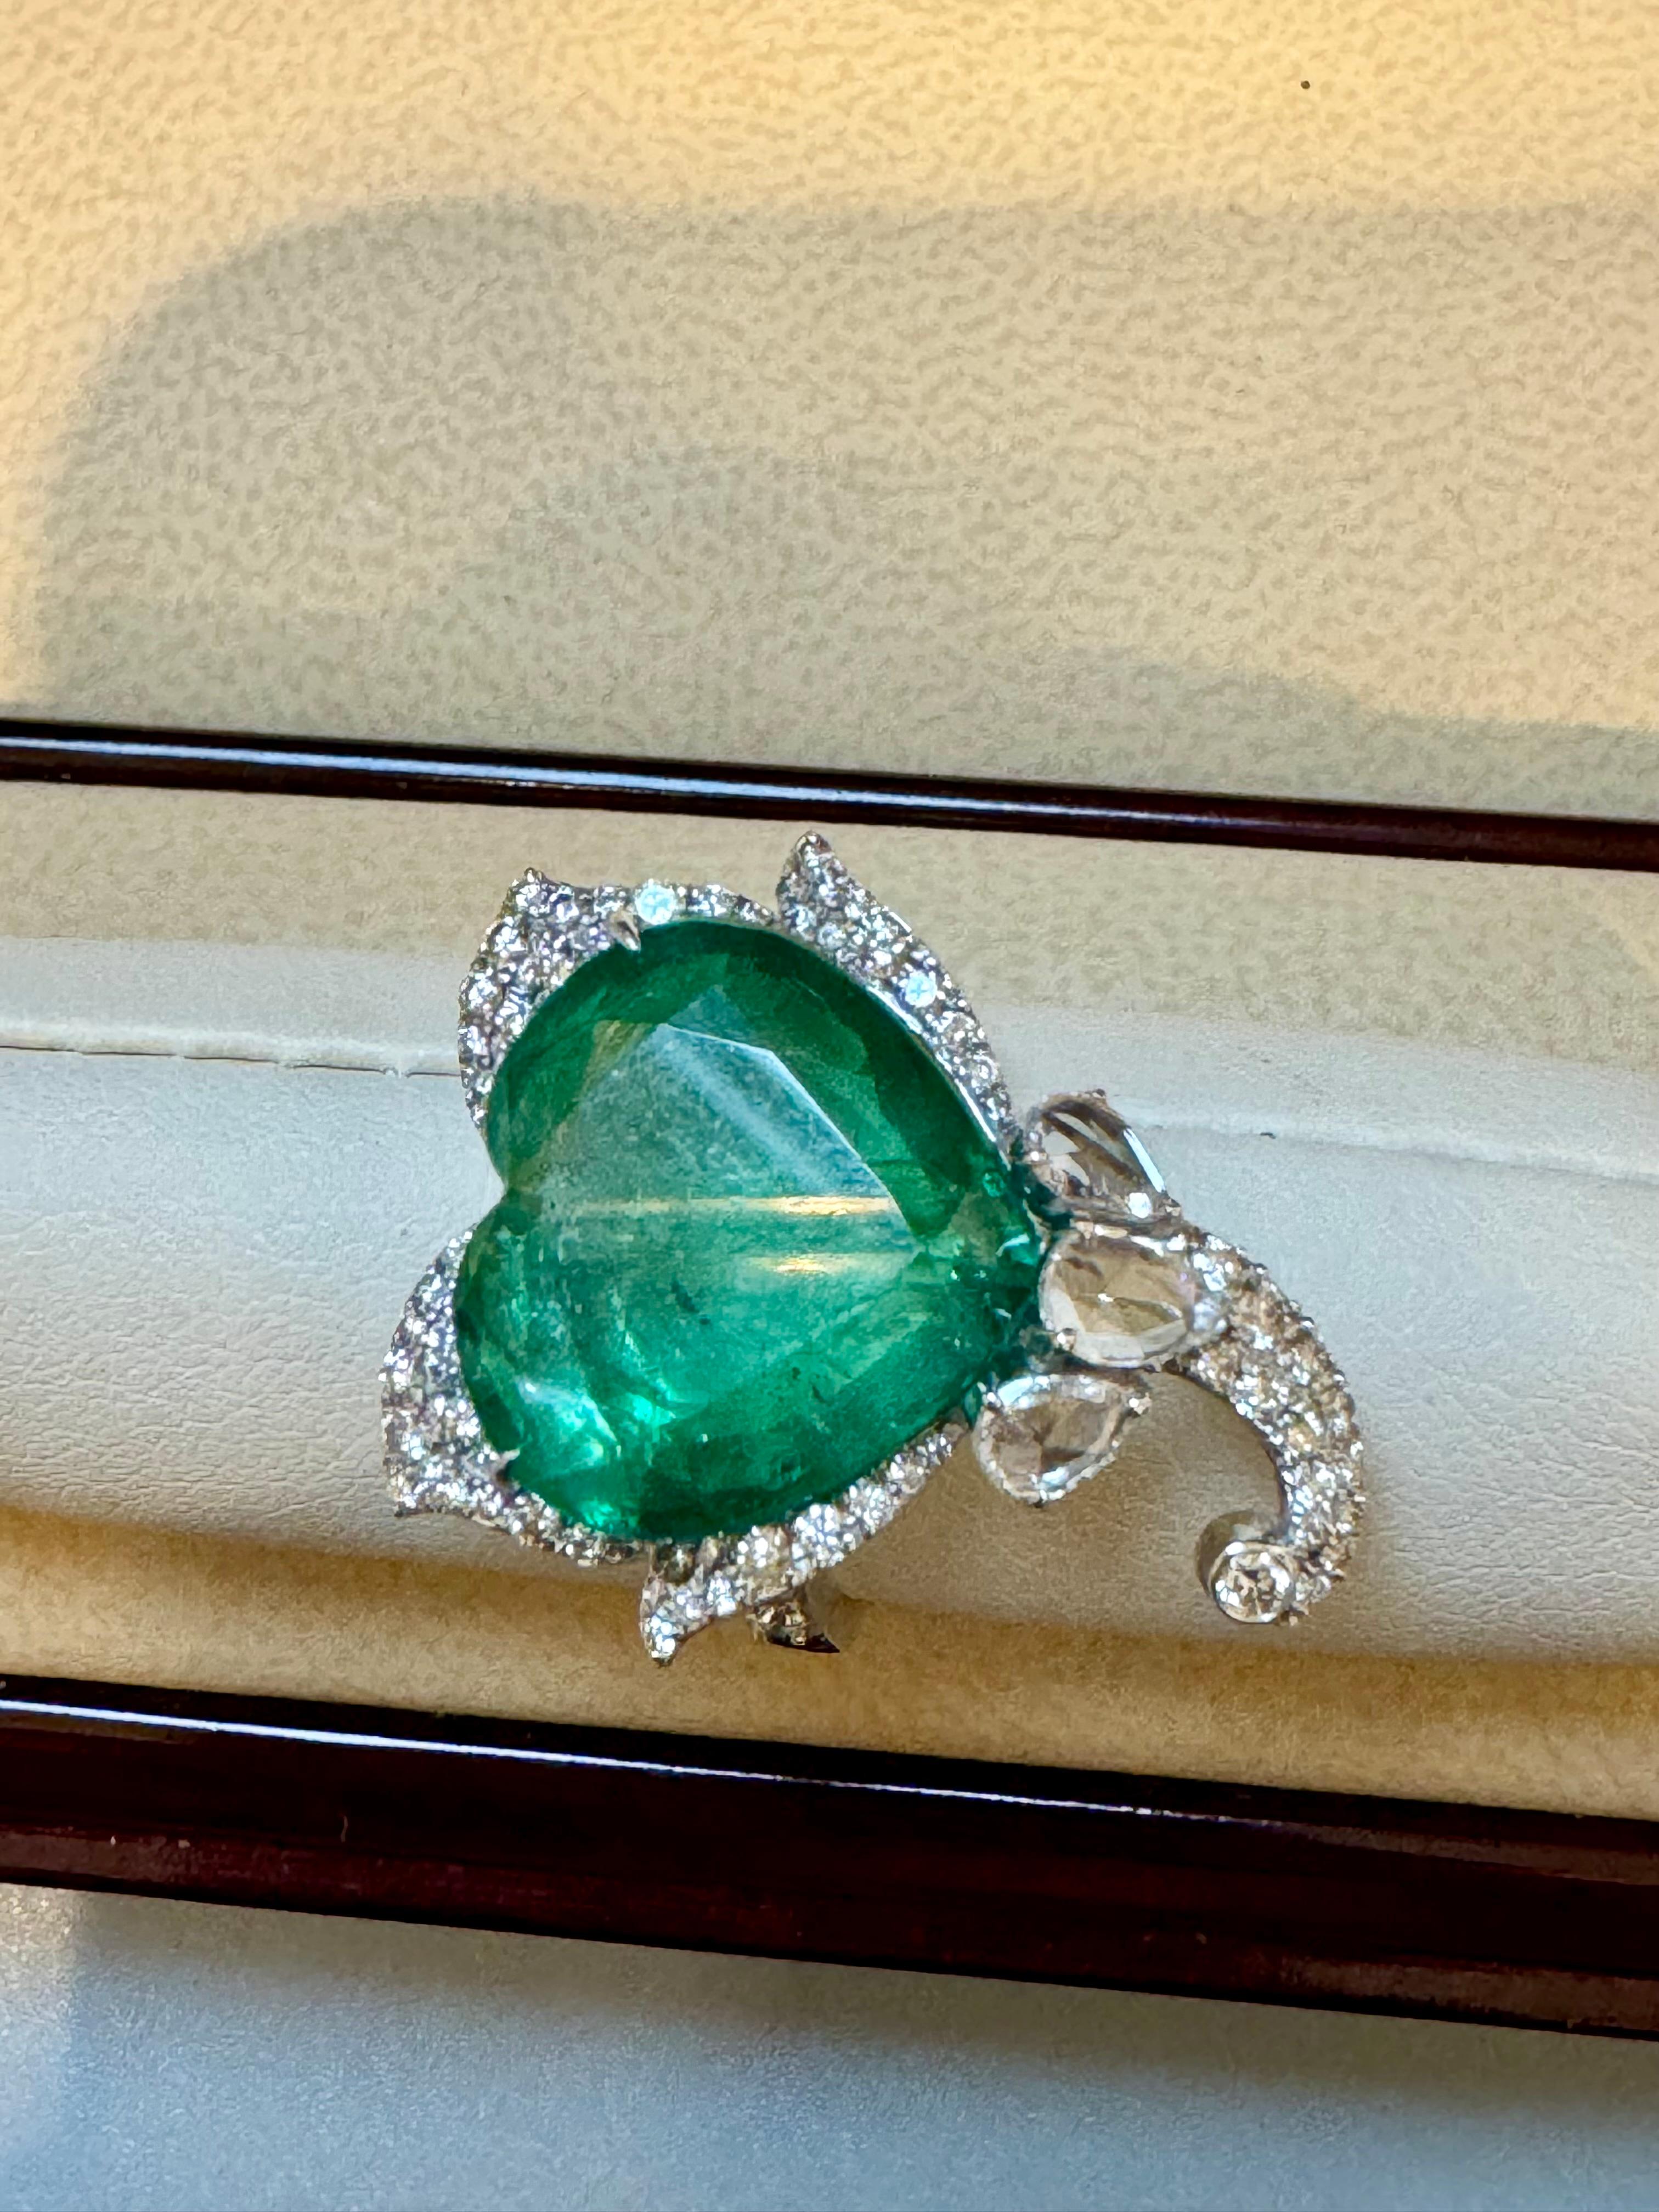 13 Ct  Zambian Heart Cut Emerald & 1.5 Ct Diamond Ring, 18 Kt Gold Size 8.5 
 This classic ring features a Heart cut Zambian emerald of extreme fine quality, boasting a desirable color and luster, originating from Zambia. Accompanied by many  rose